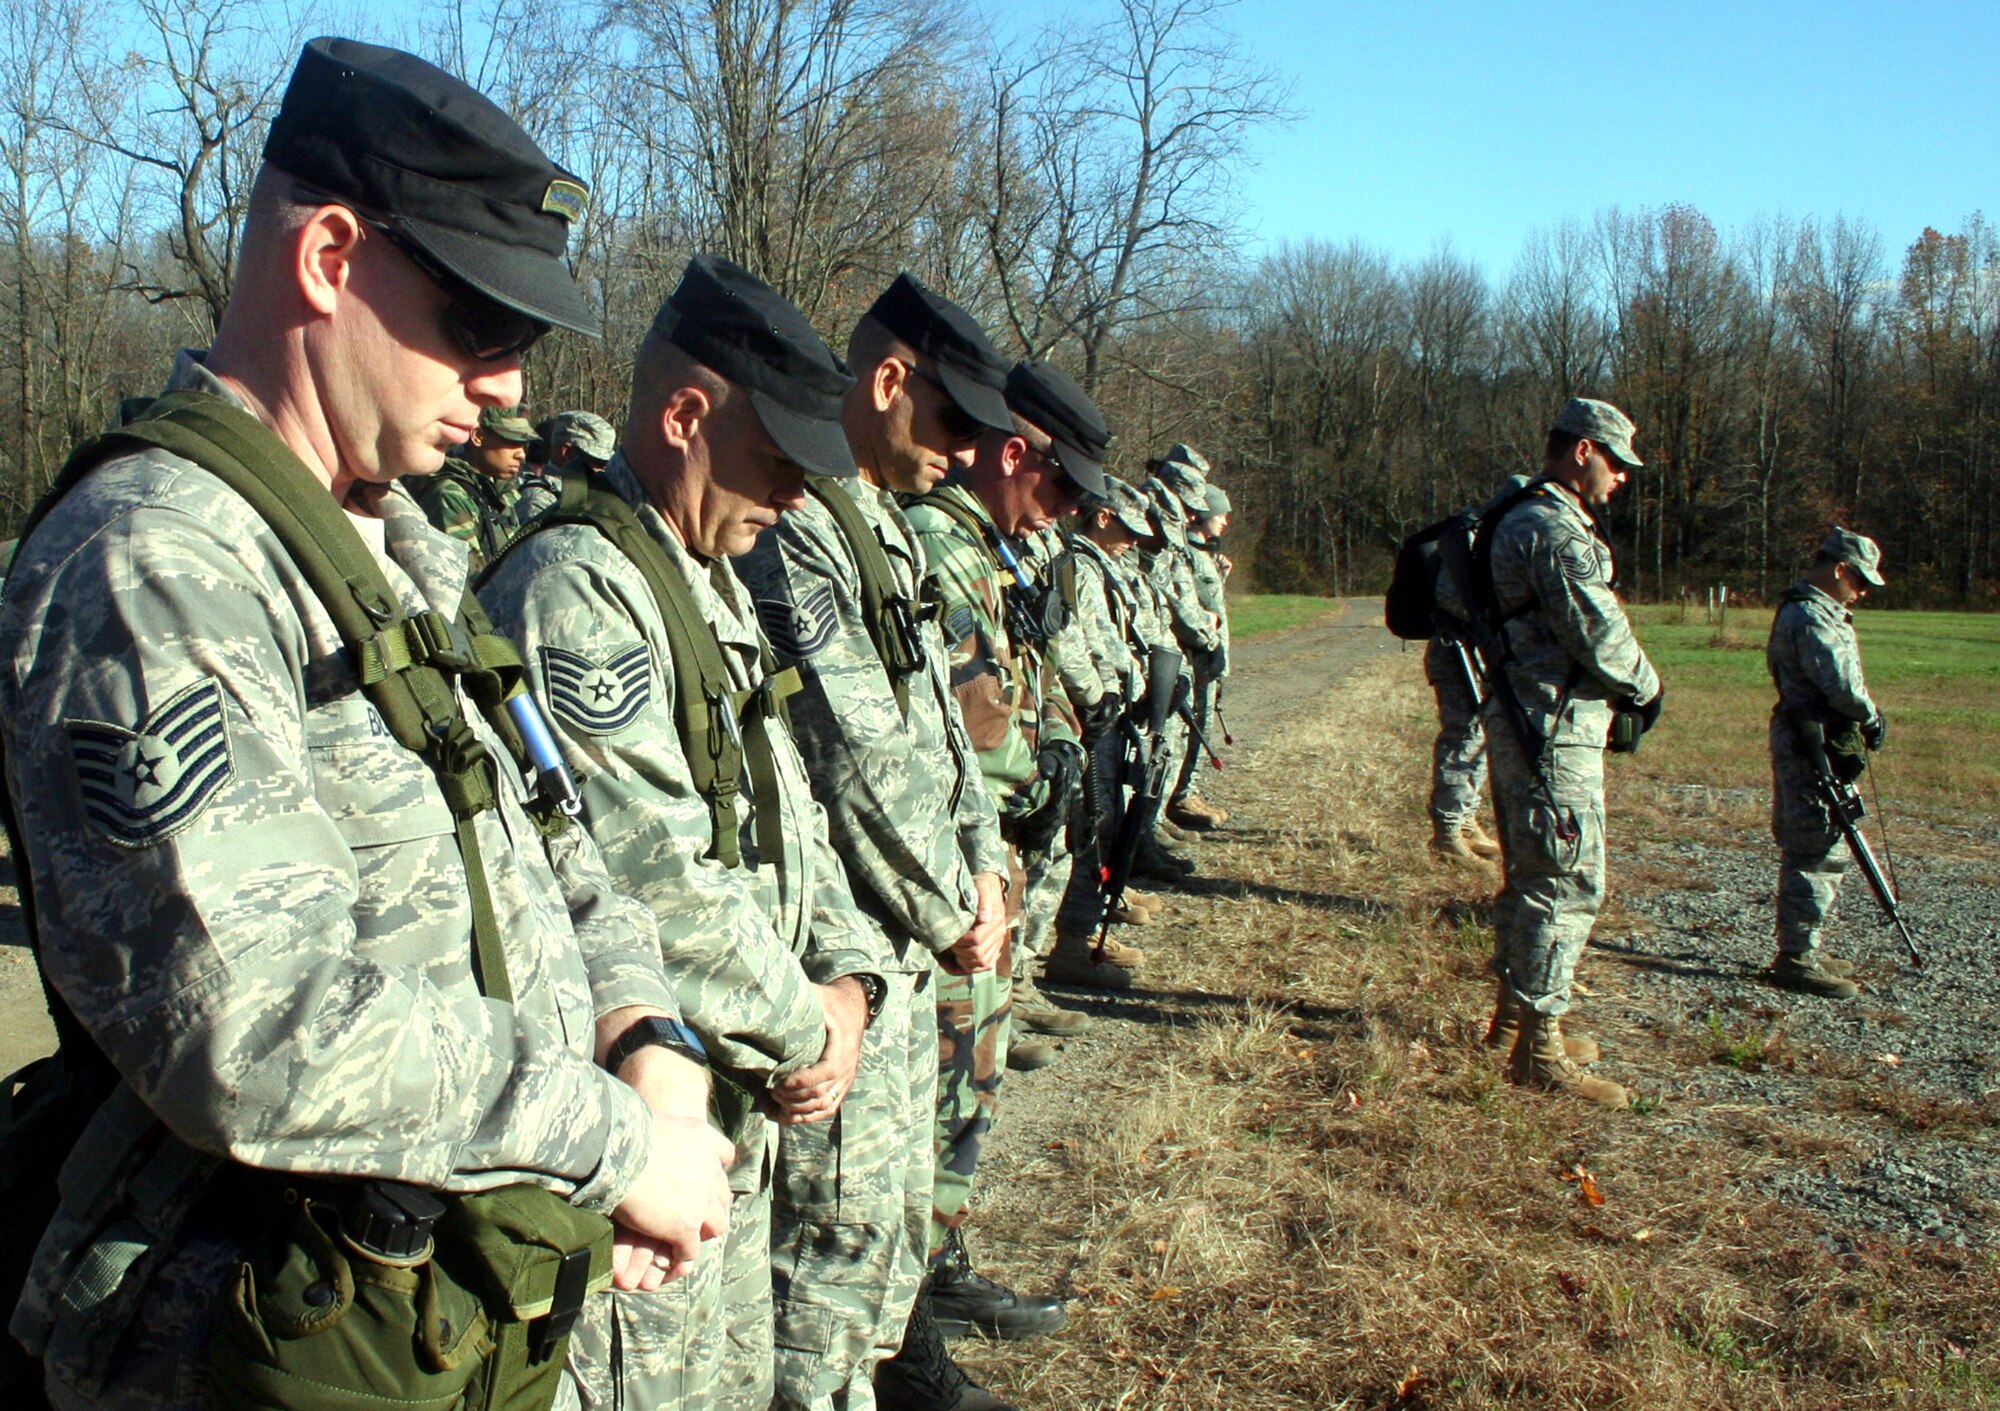 Instructors from the U.S. Air Force Expeditionary Center's 421st Combat Training Squadron and Airmen from "Echo Flight" of the Combat Airman Skills Training Course 10-1A stop for a moment of silence for the shooting victims of Fort Hood, Texas, at 2:34 p.m. on Nov. 6, 2009, on a training range at Joint Base McGuire-Dix-Lakehurst, N.J. The training instructors and students were conducting land navigation training at the range and stopped all activities for that moment to remember.  (U.S. Air Force Photo/Tech. Sgt. Scott T. Sturkol)